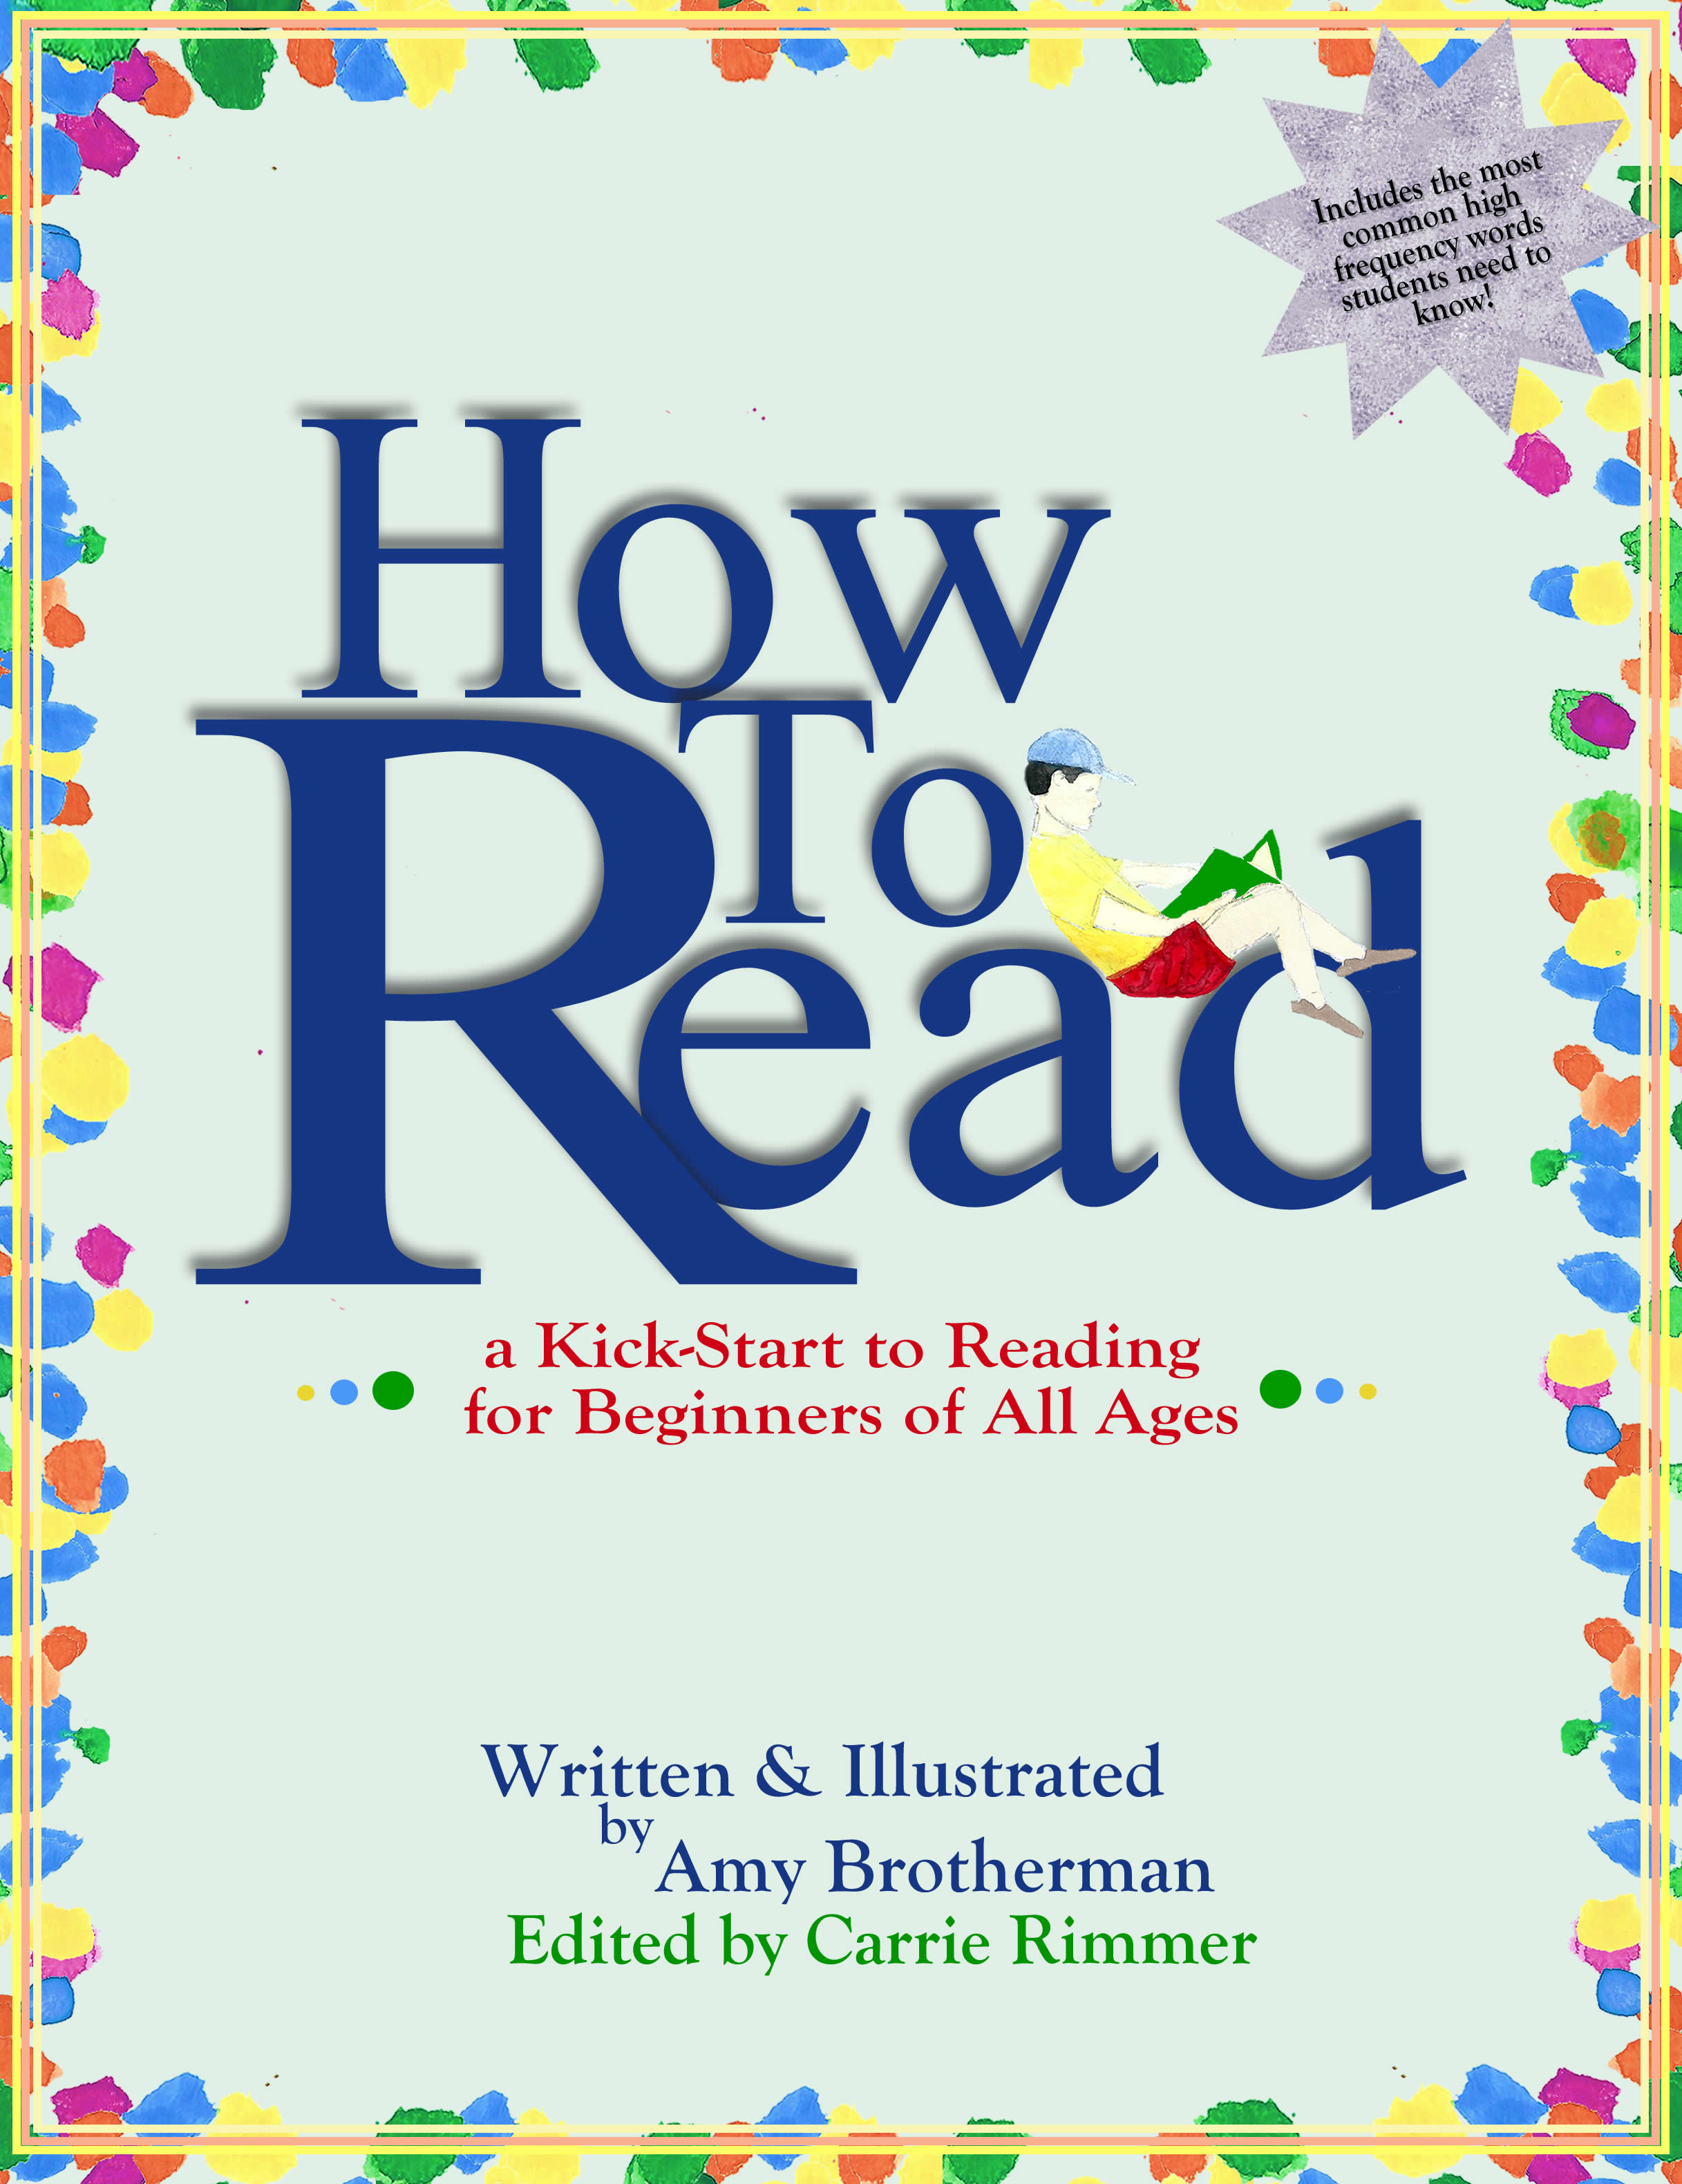 How to Read: a Kick-Start for Beginners of Any Age